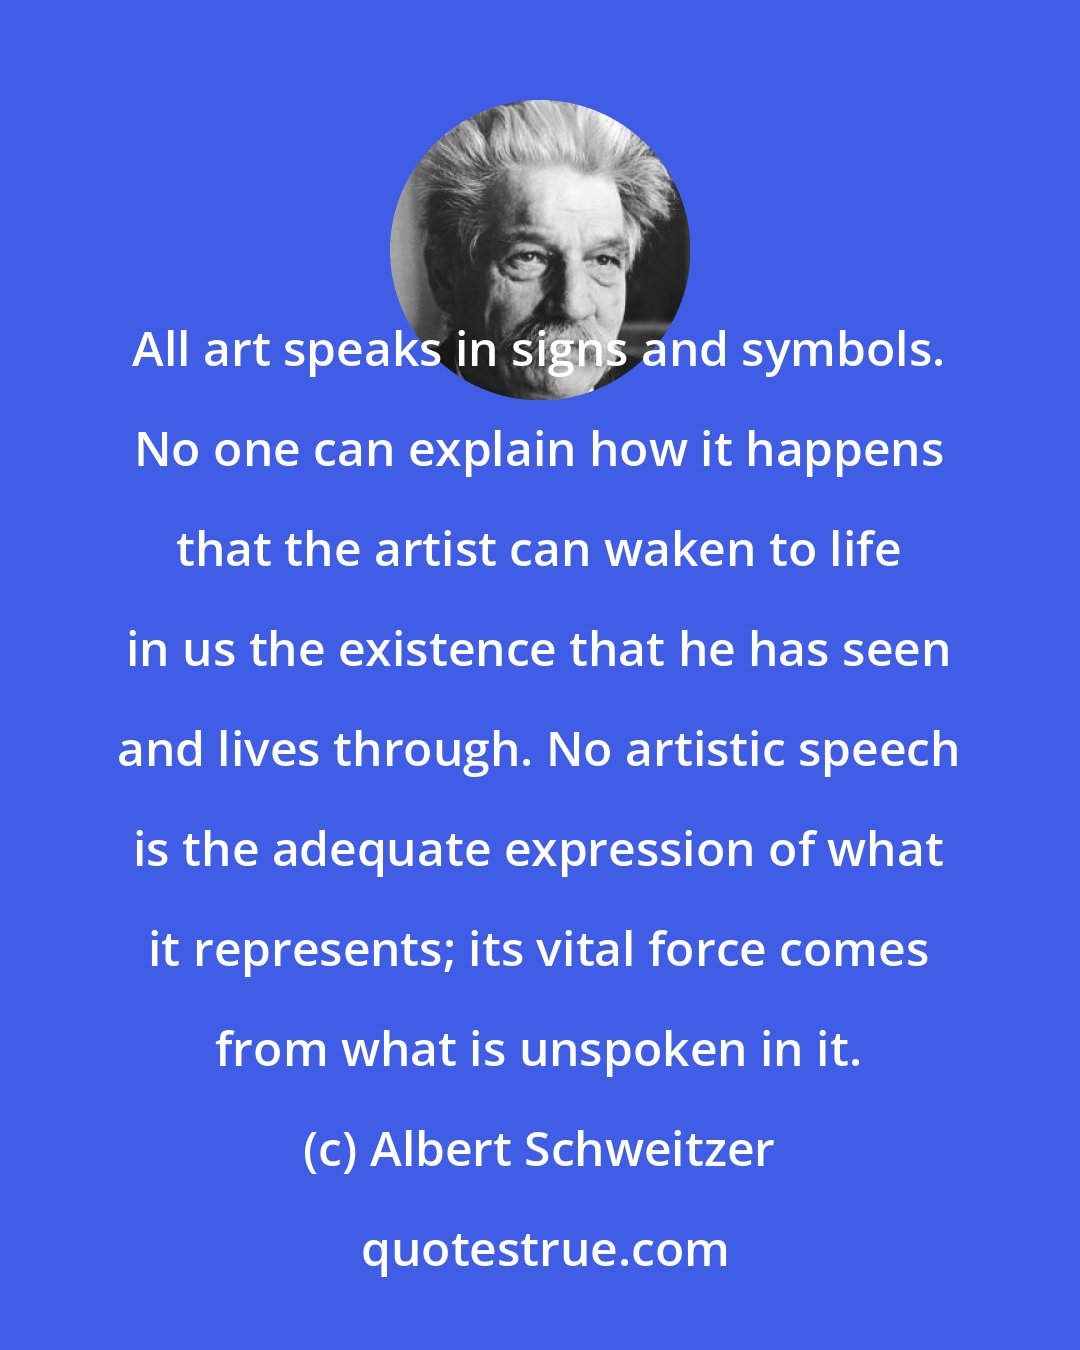 Albert Schweitzer: All art speaks in signs and symbols. No one can explain how it happens that the artist can waken to life in us the existence that he has seen and lives through. No artistic speech is the adequate expression of what it represents; its vital force comes from what is unspoken in it.